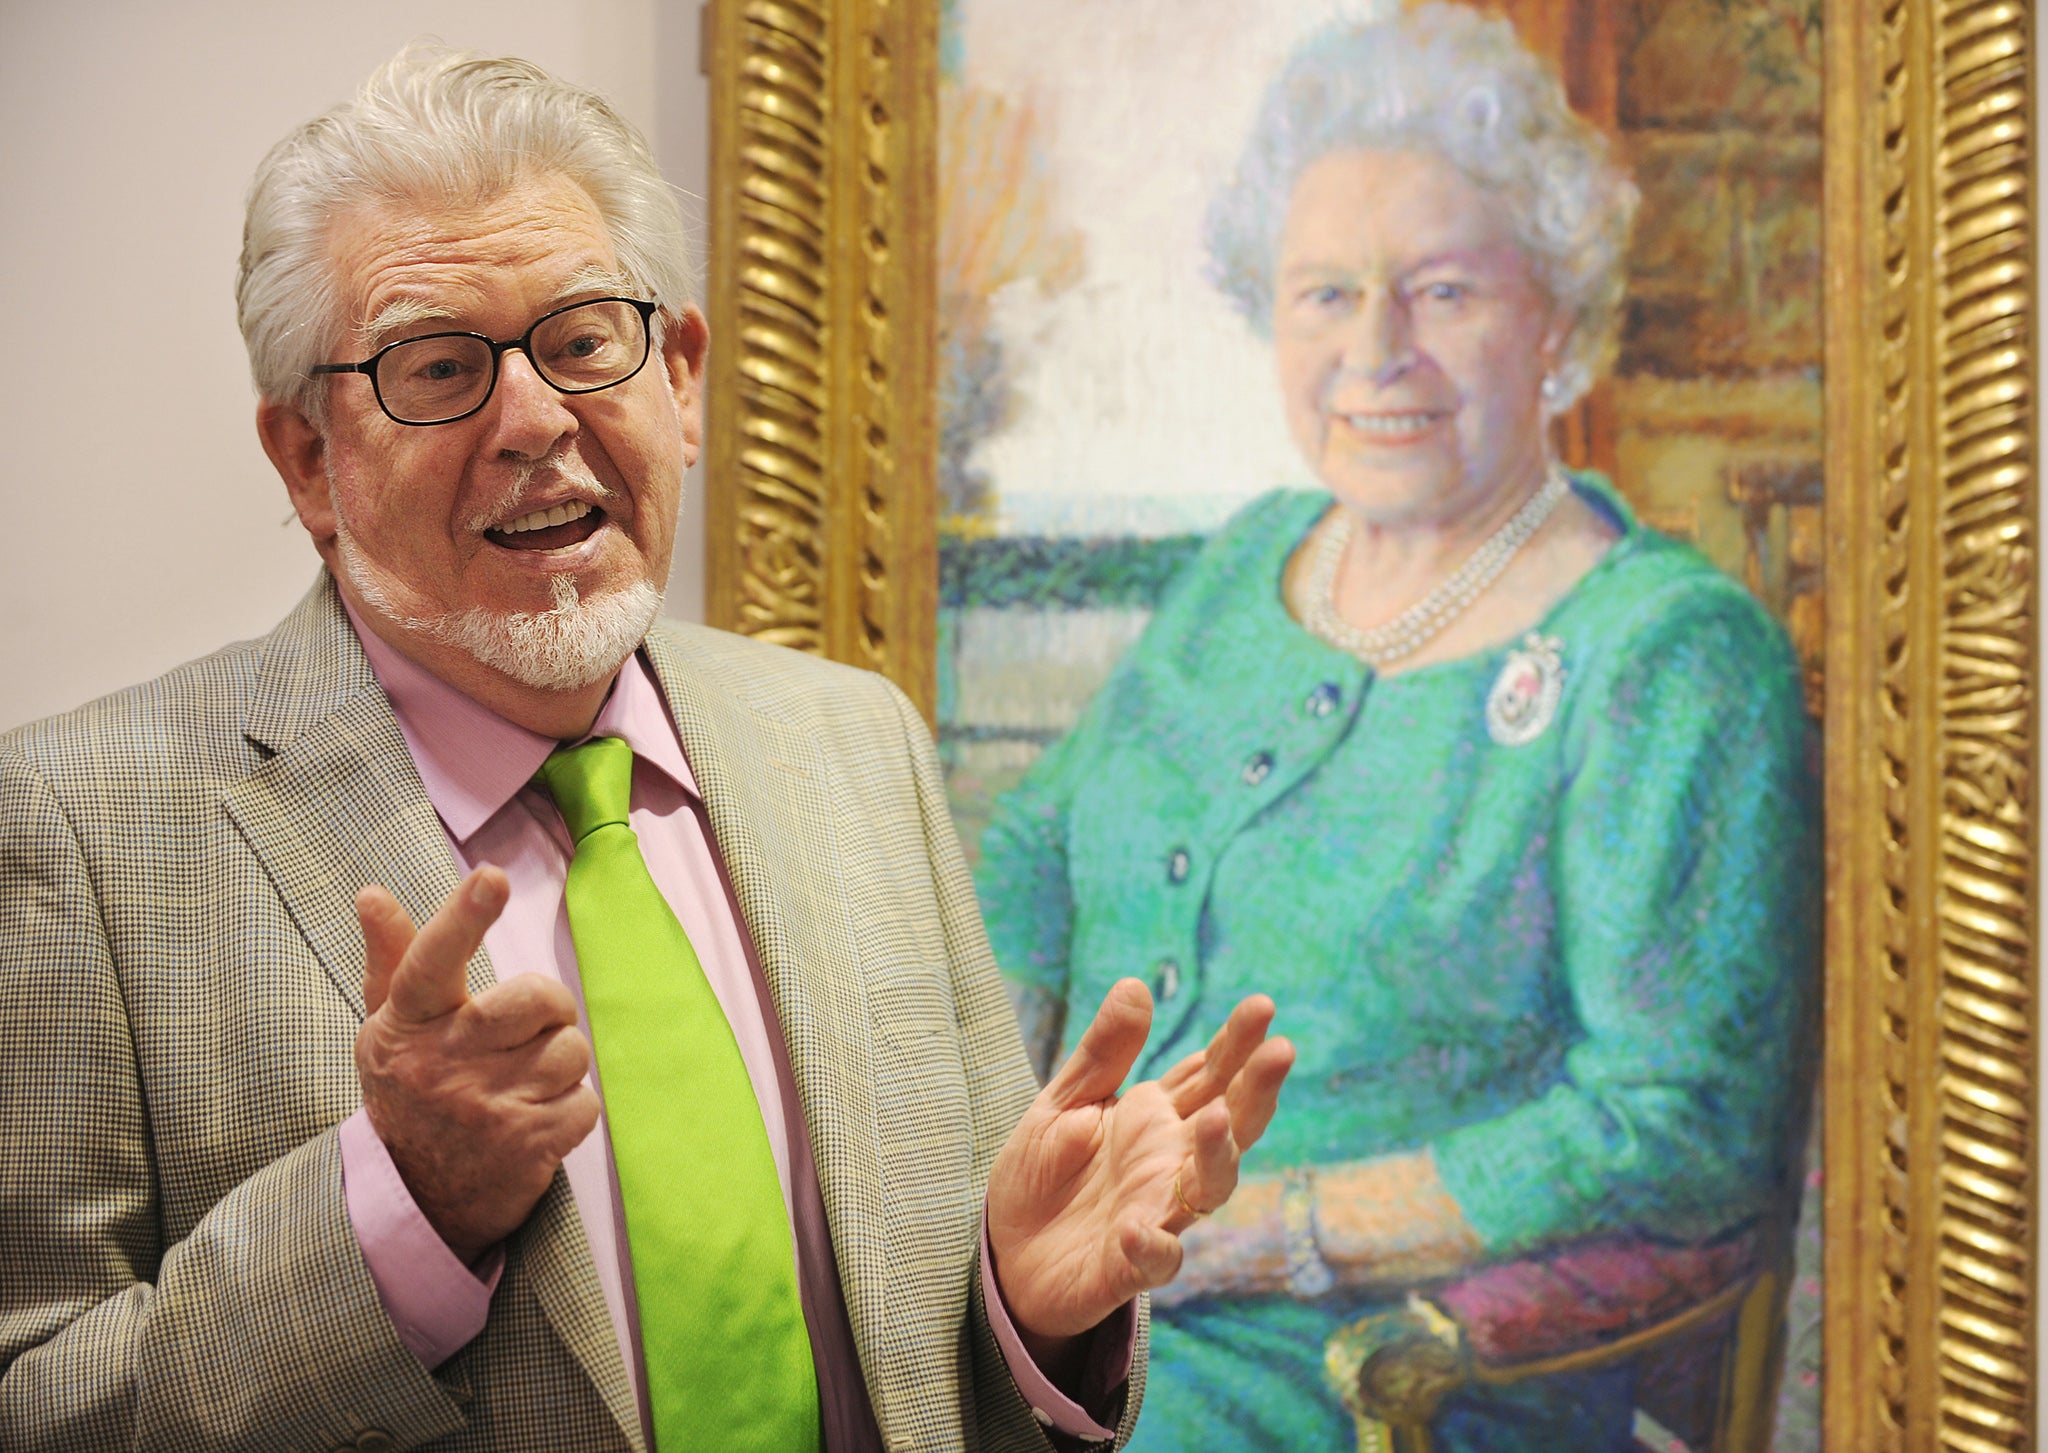 Rolf Harris with his portrait of the Queen at a London art gallery in 2010